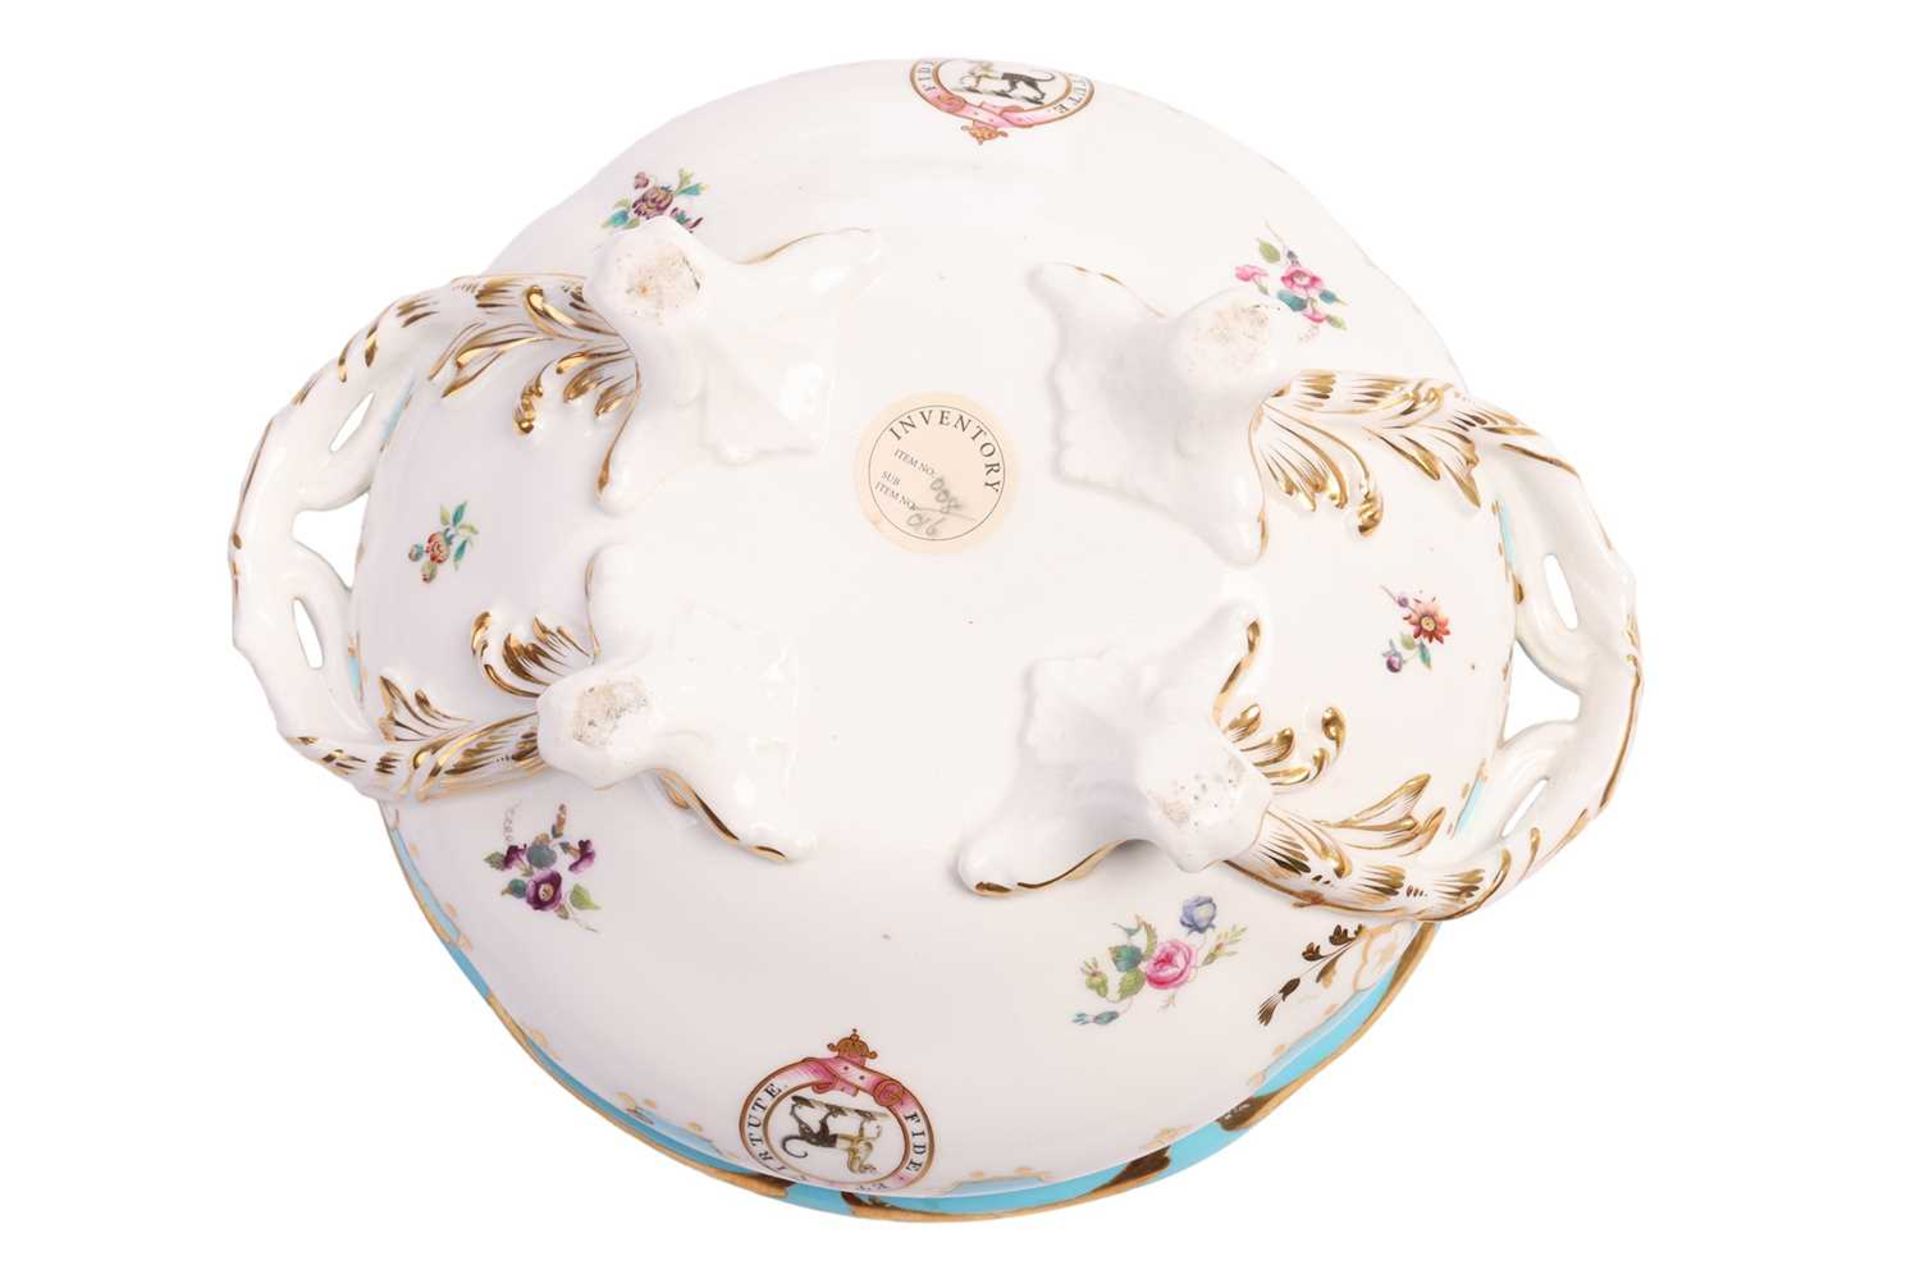 An extensive 19th century part dinner service, bearing an armorial crest with 'Fide et Virtute' to t - Image 7 of 8